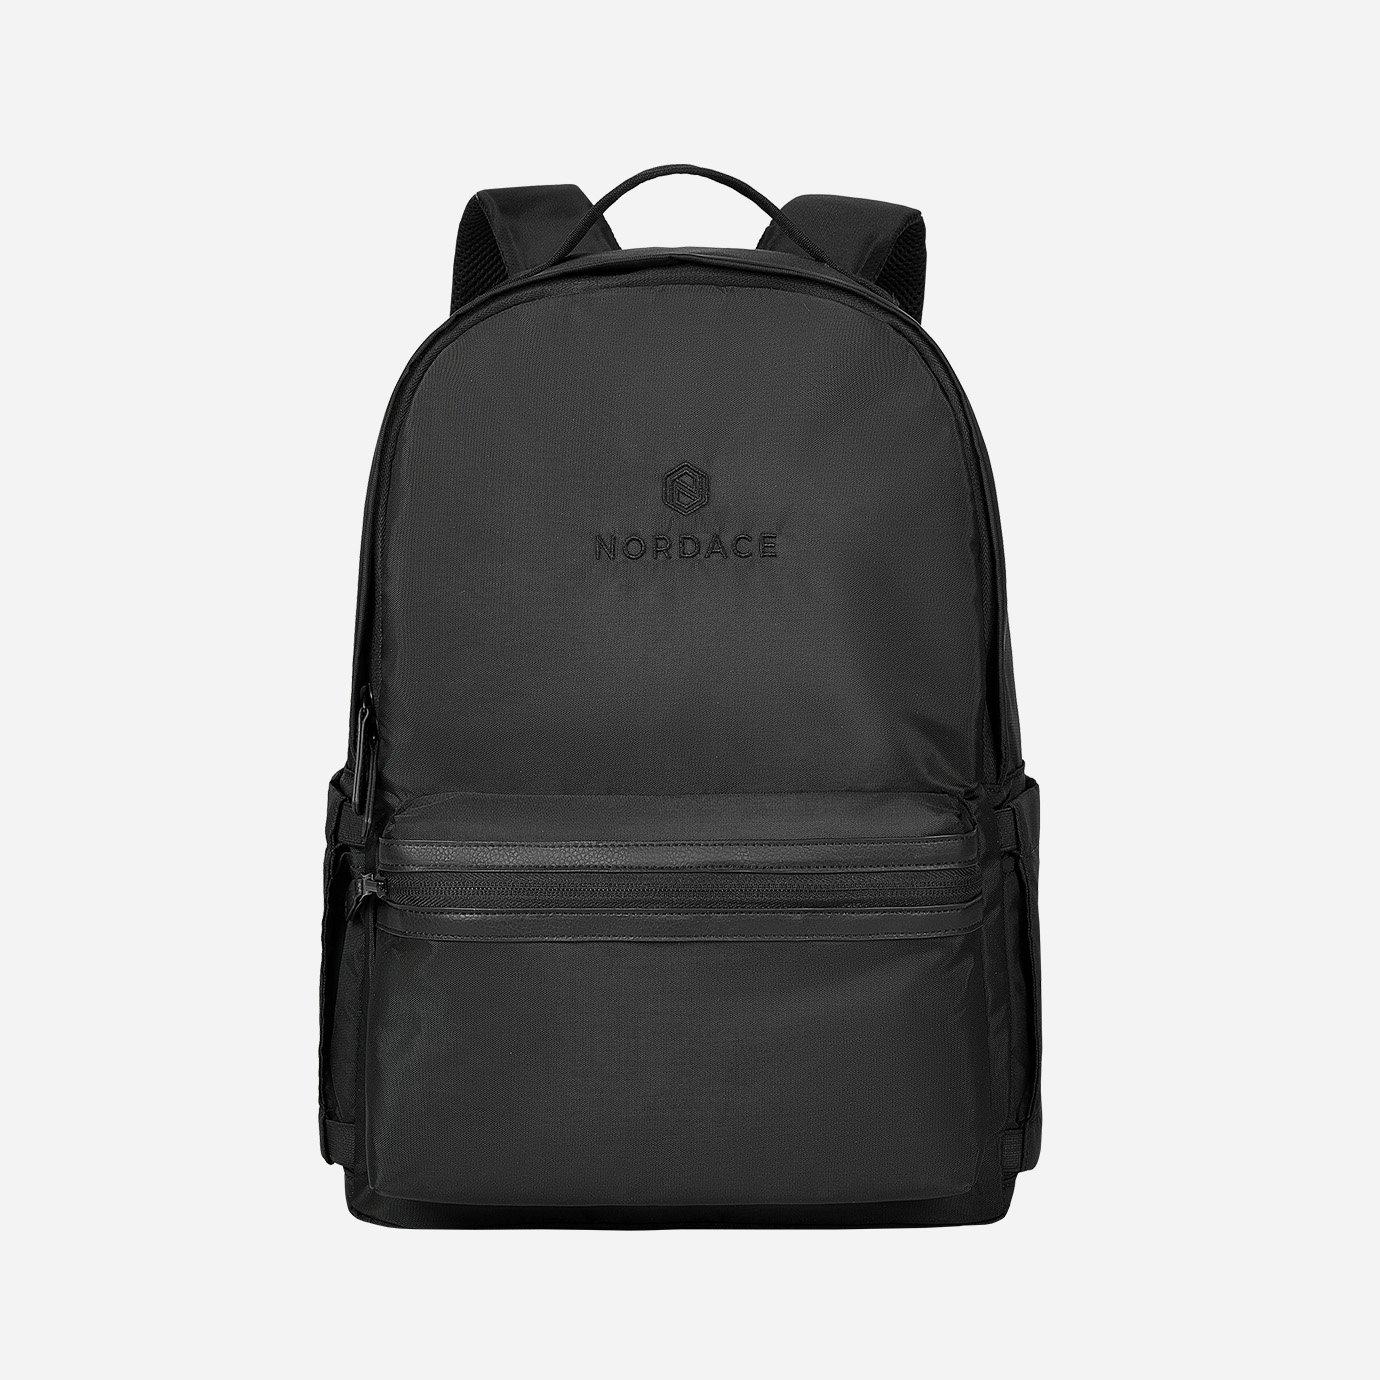 Nordace - Roto Foldable Backpack